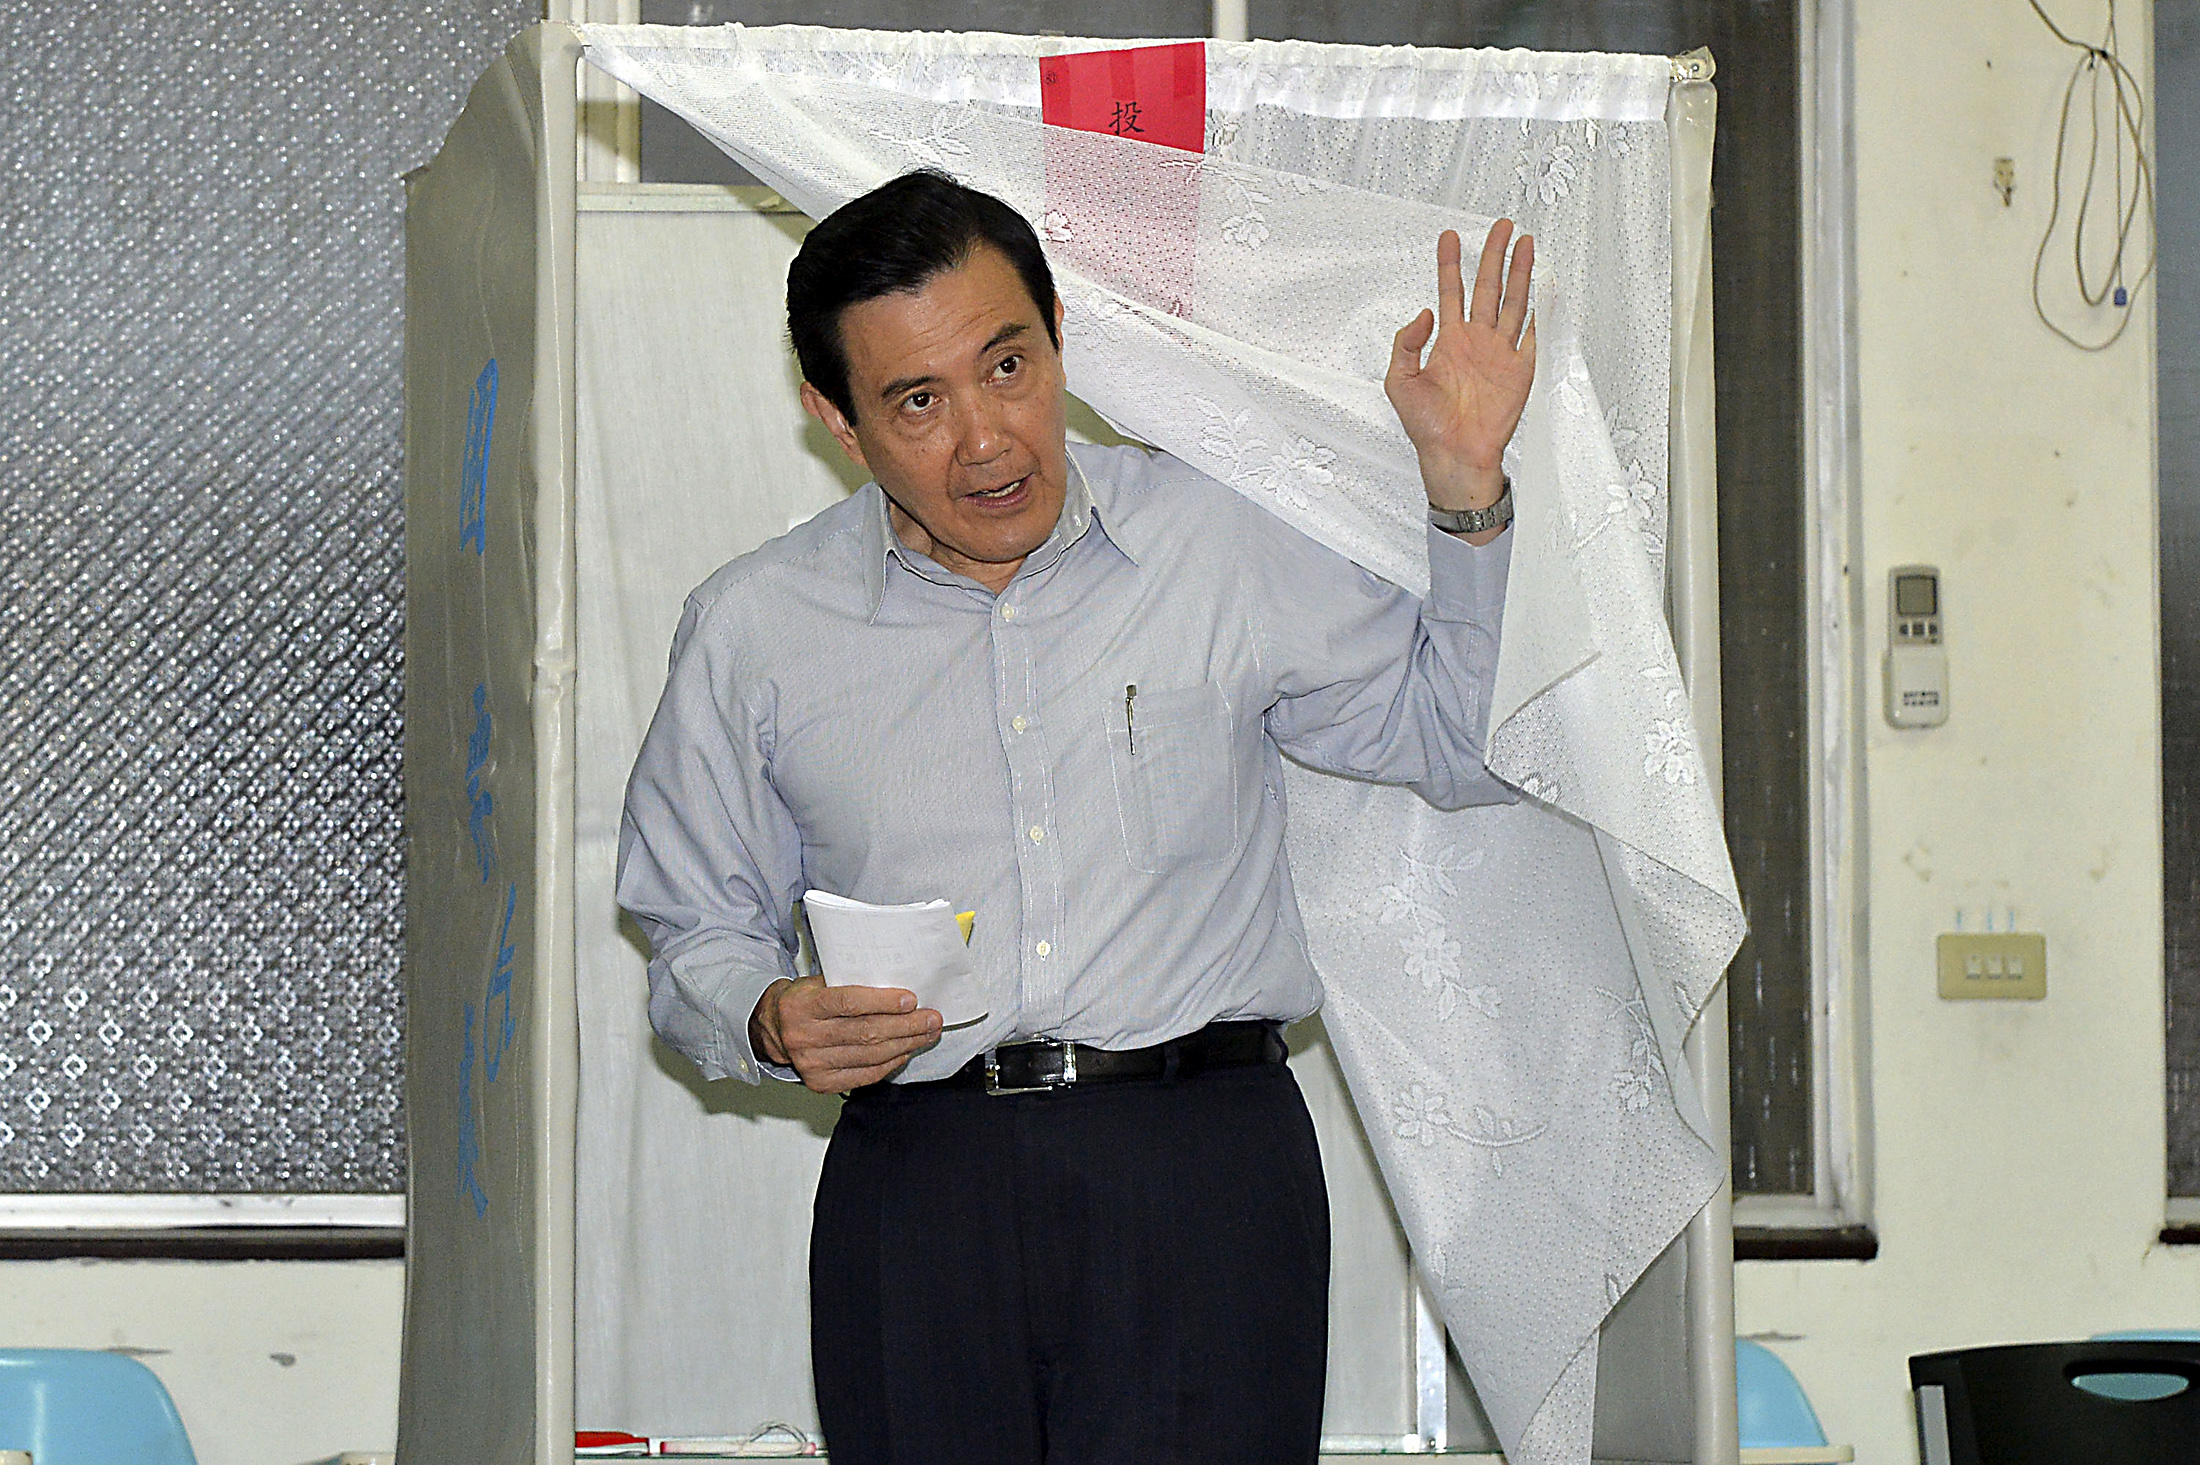 Taiwan's President Ma Ying-jeou walks out of a voting booth at a voting station during local elections in Taipei